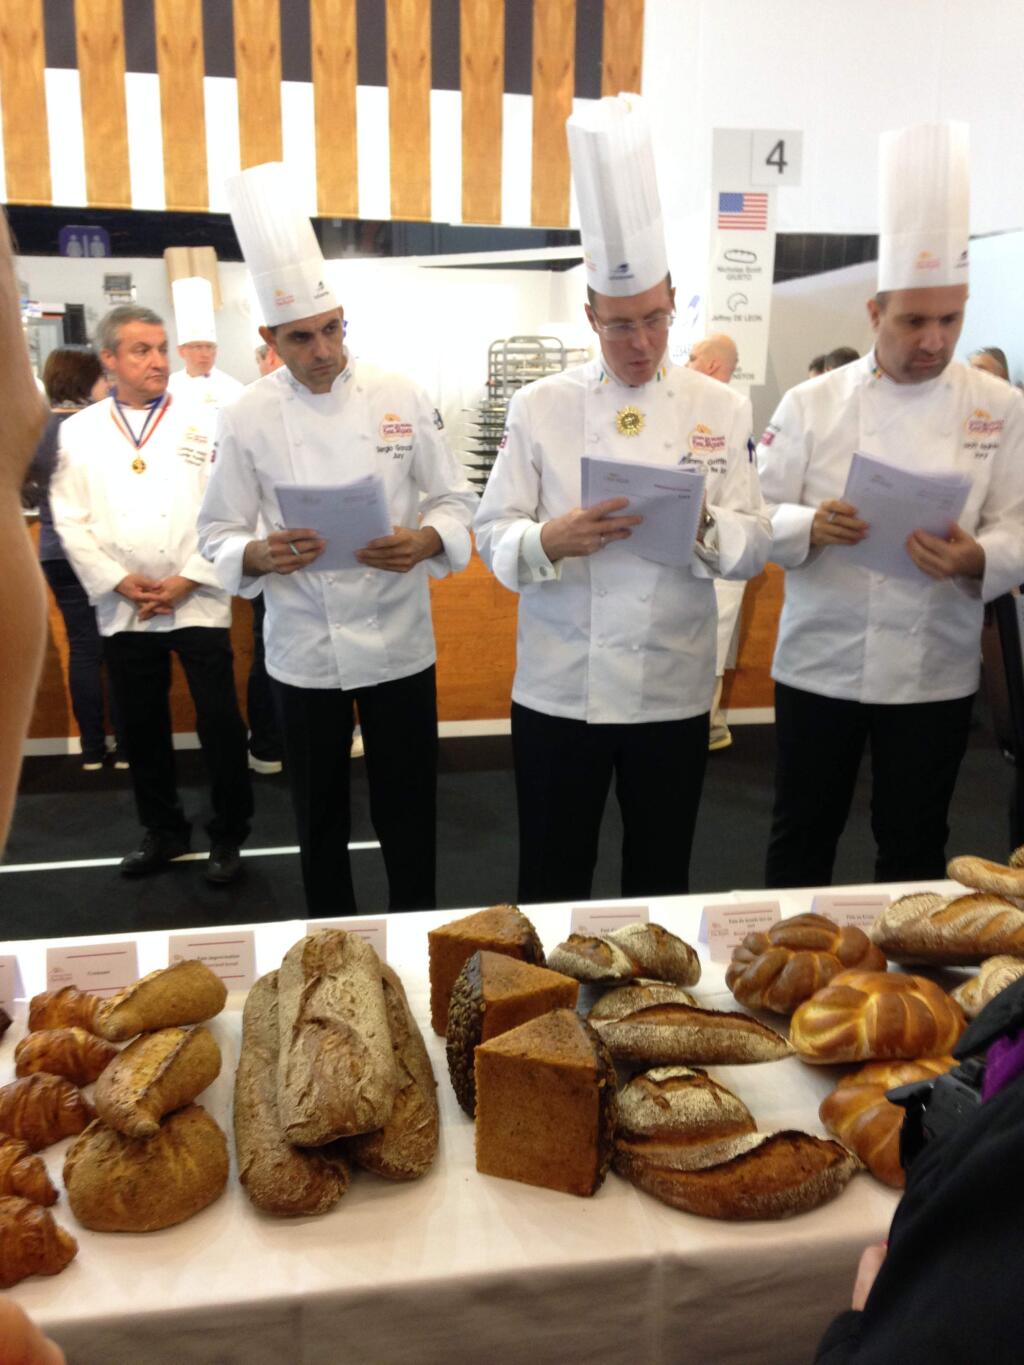 RISING STAR: 2016 Coupe Judging of breads created by Nicky Giusto for Team USA(Photo credit: Gillian Burgess)